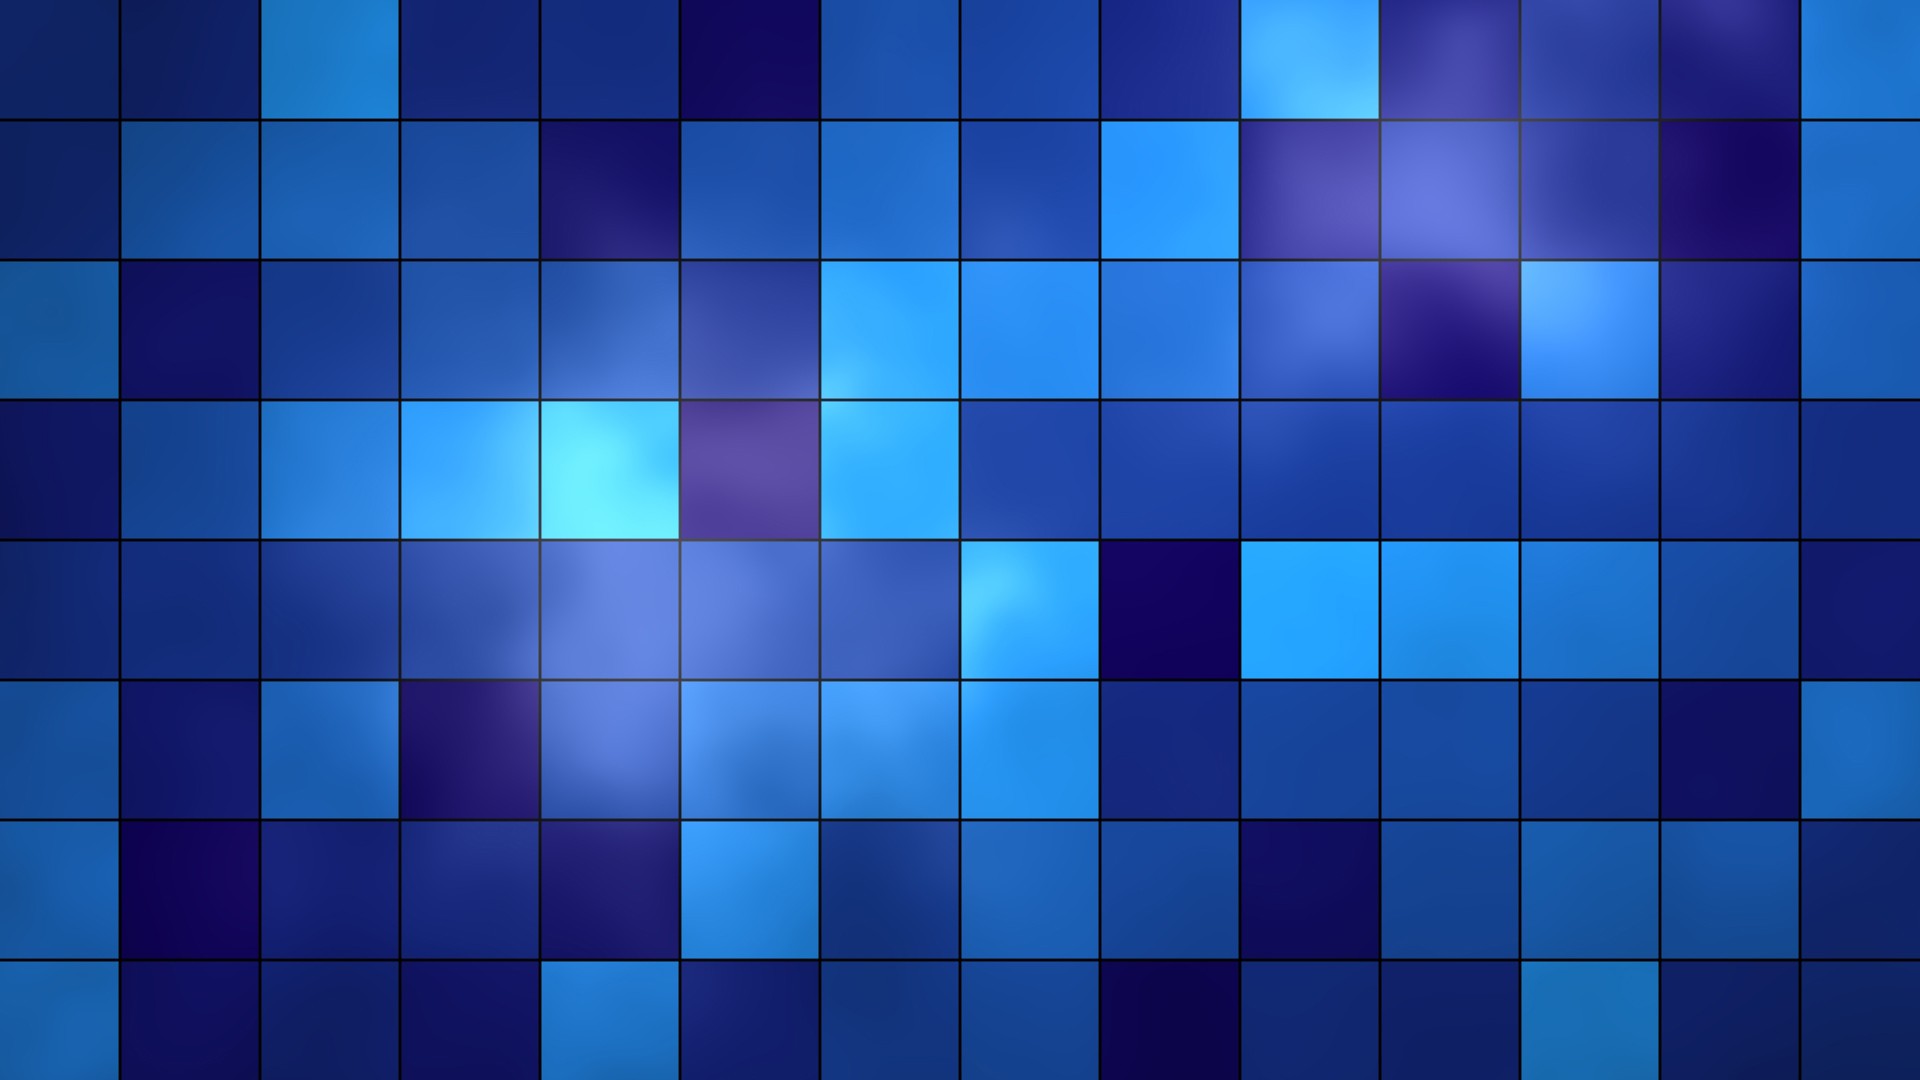 41 Free High Definition Blue Wallpapers For Download